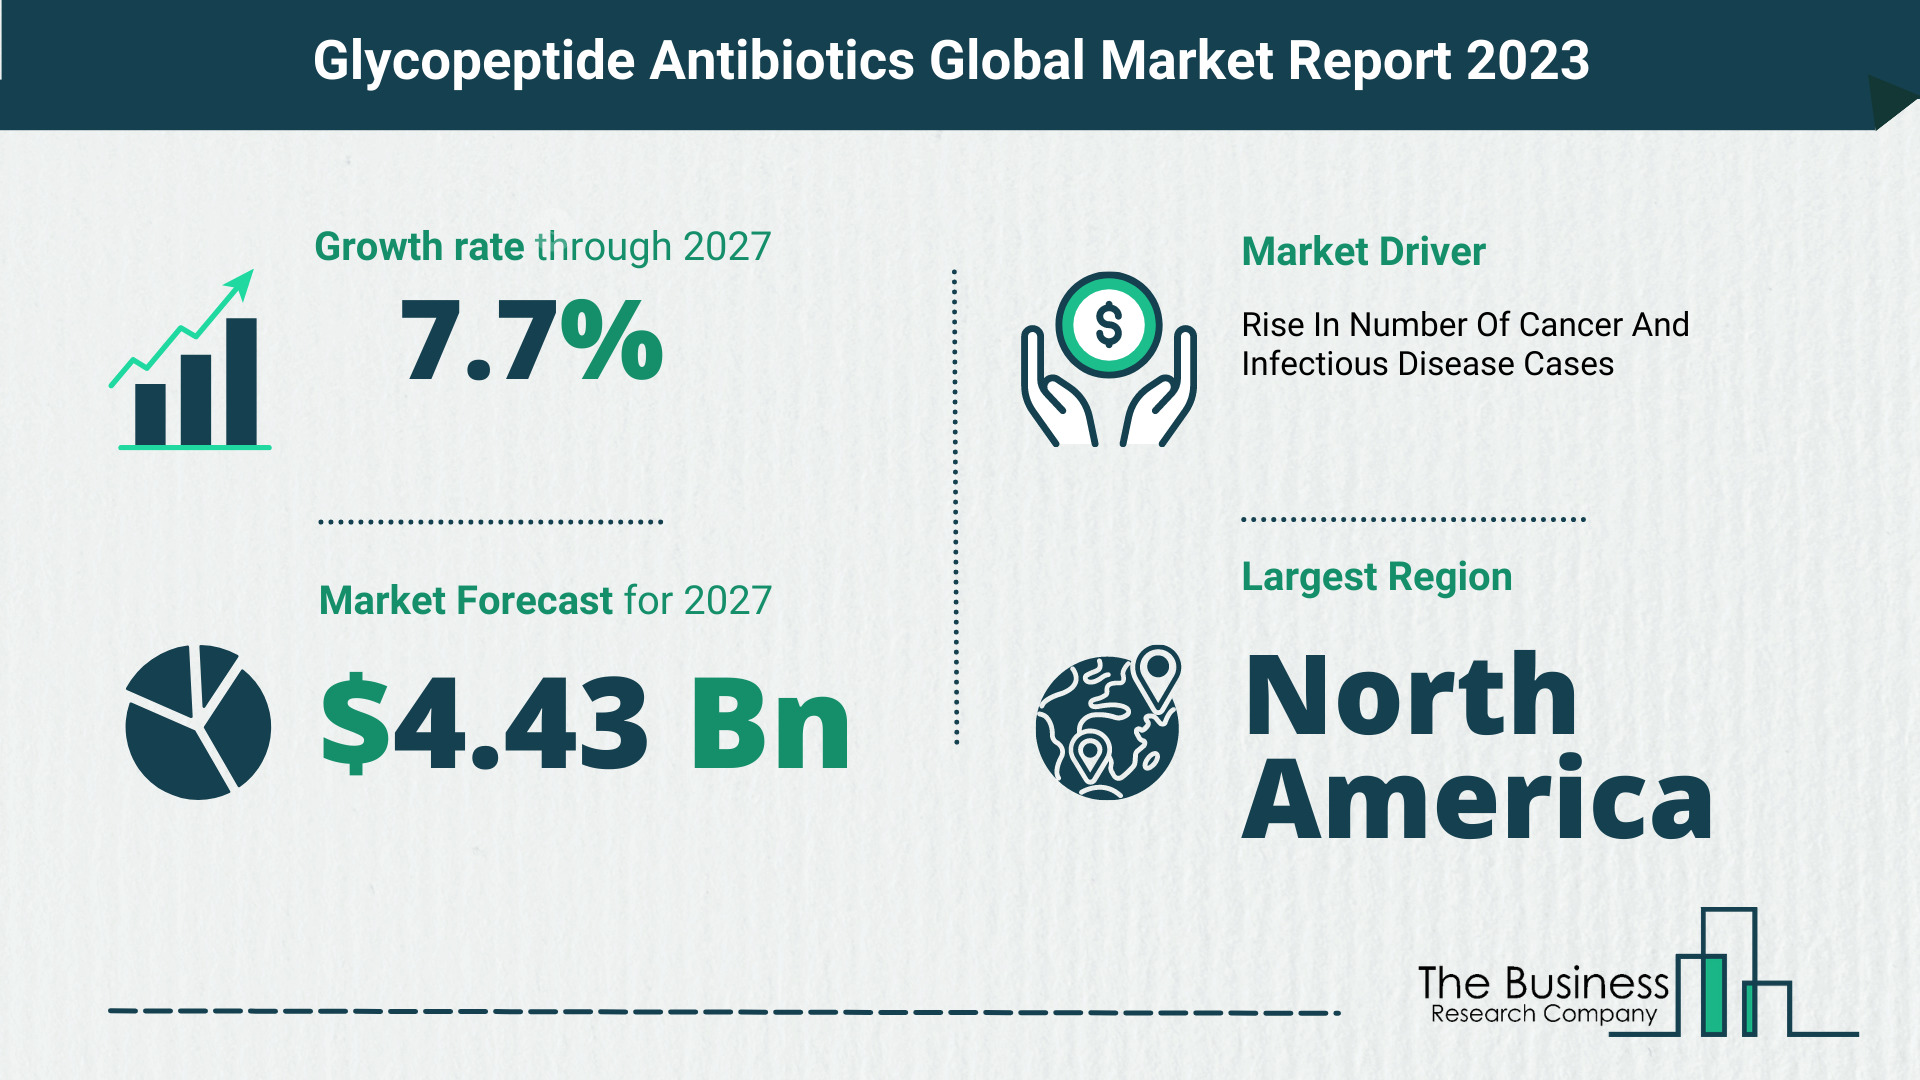 What Will The Glycopeptide Antibiotics Market Look Like In 2023?